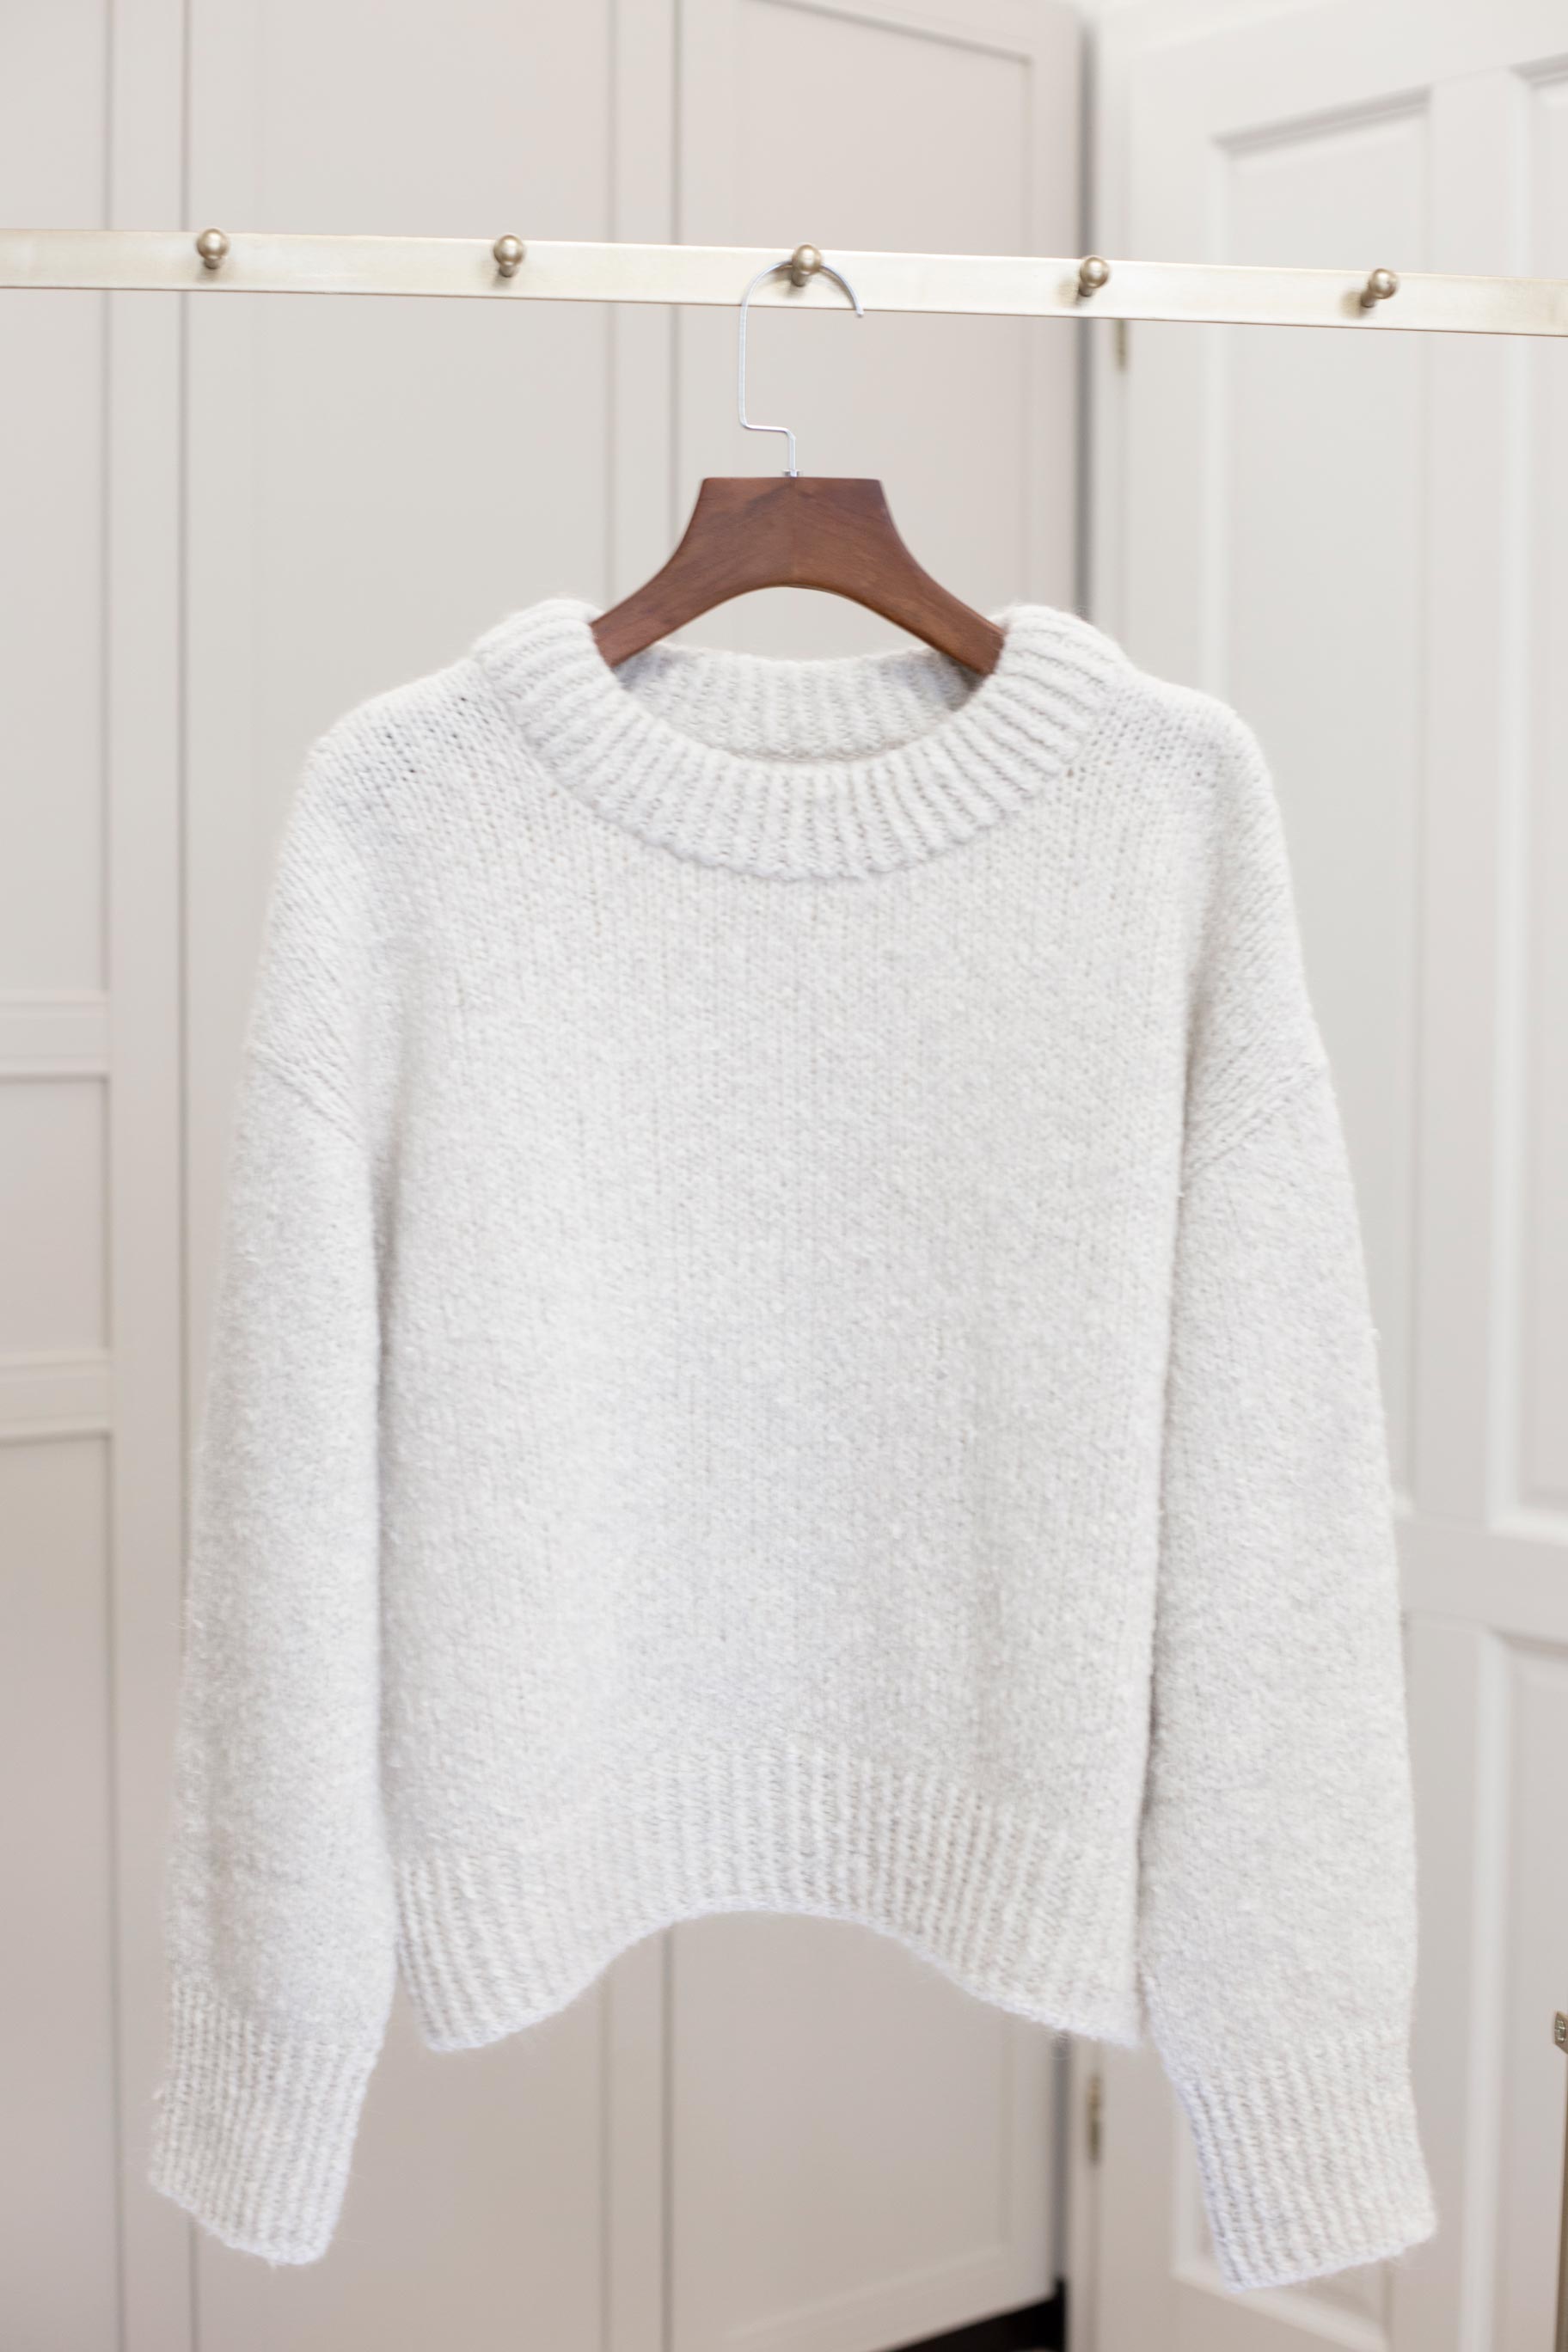 Penny Sweater, a loose-fit sweater with round neckline knitting pattern by MorecaKnit